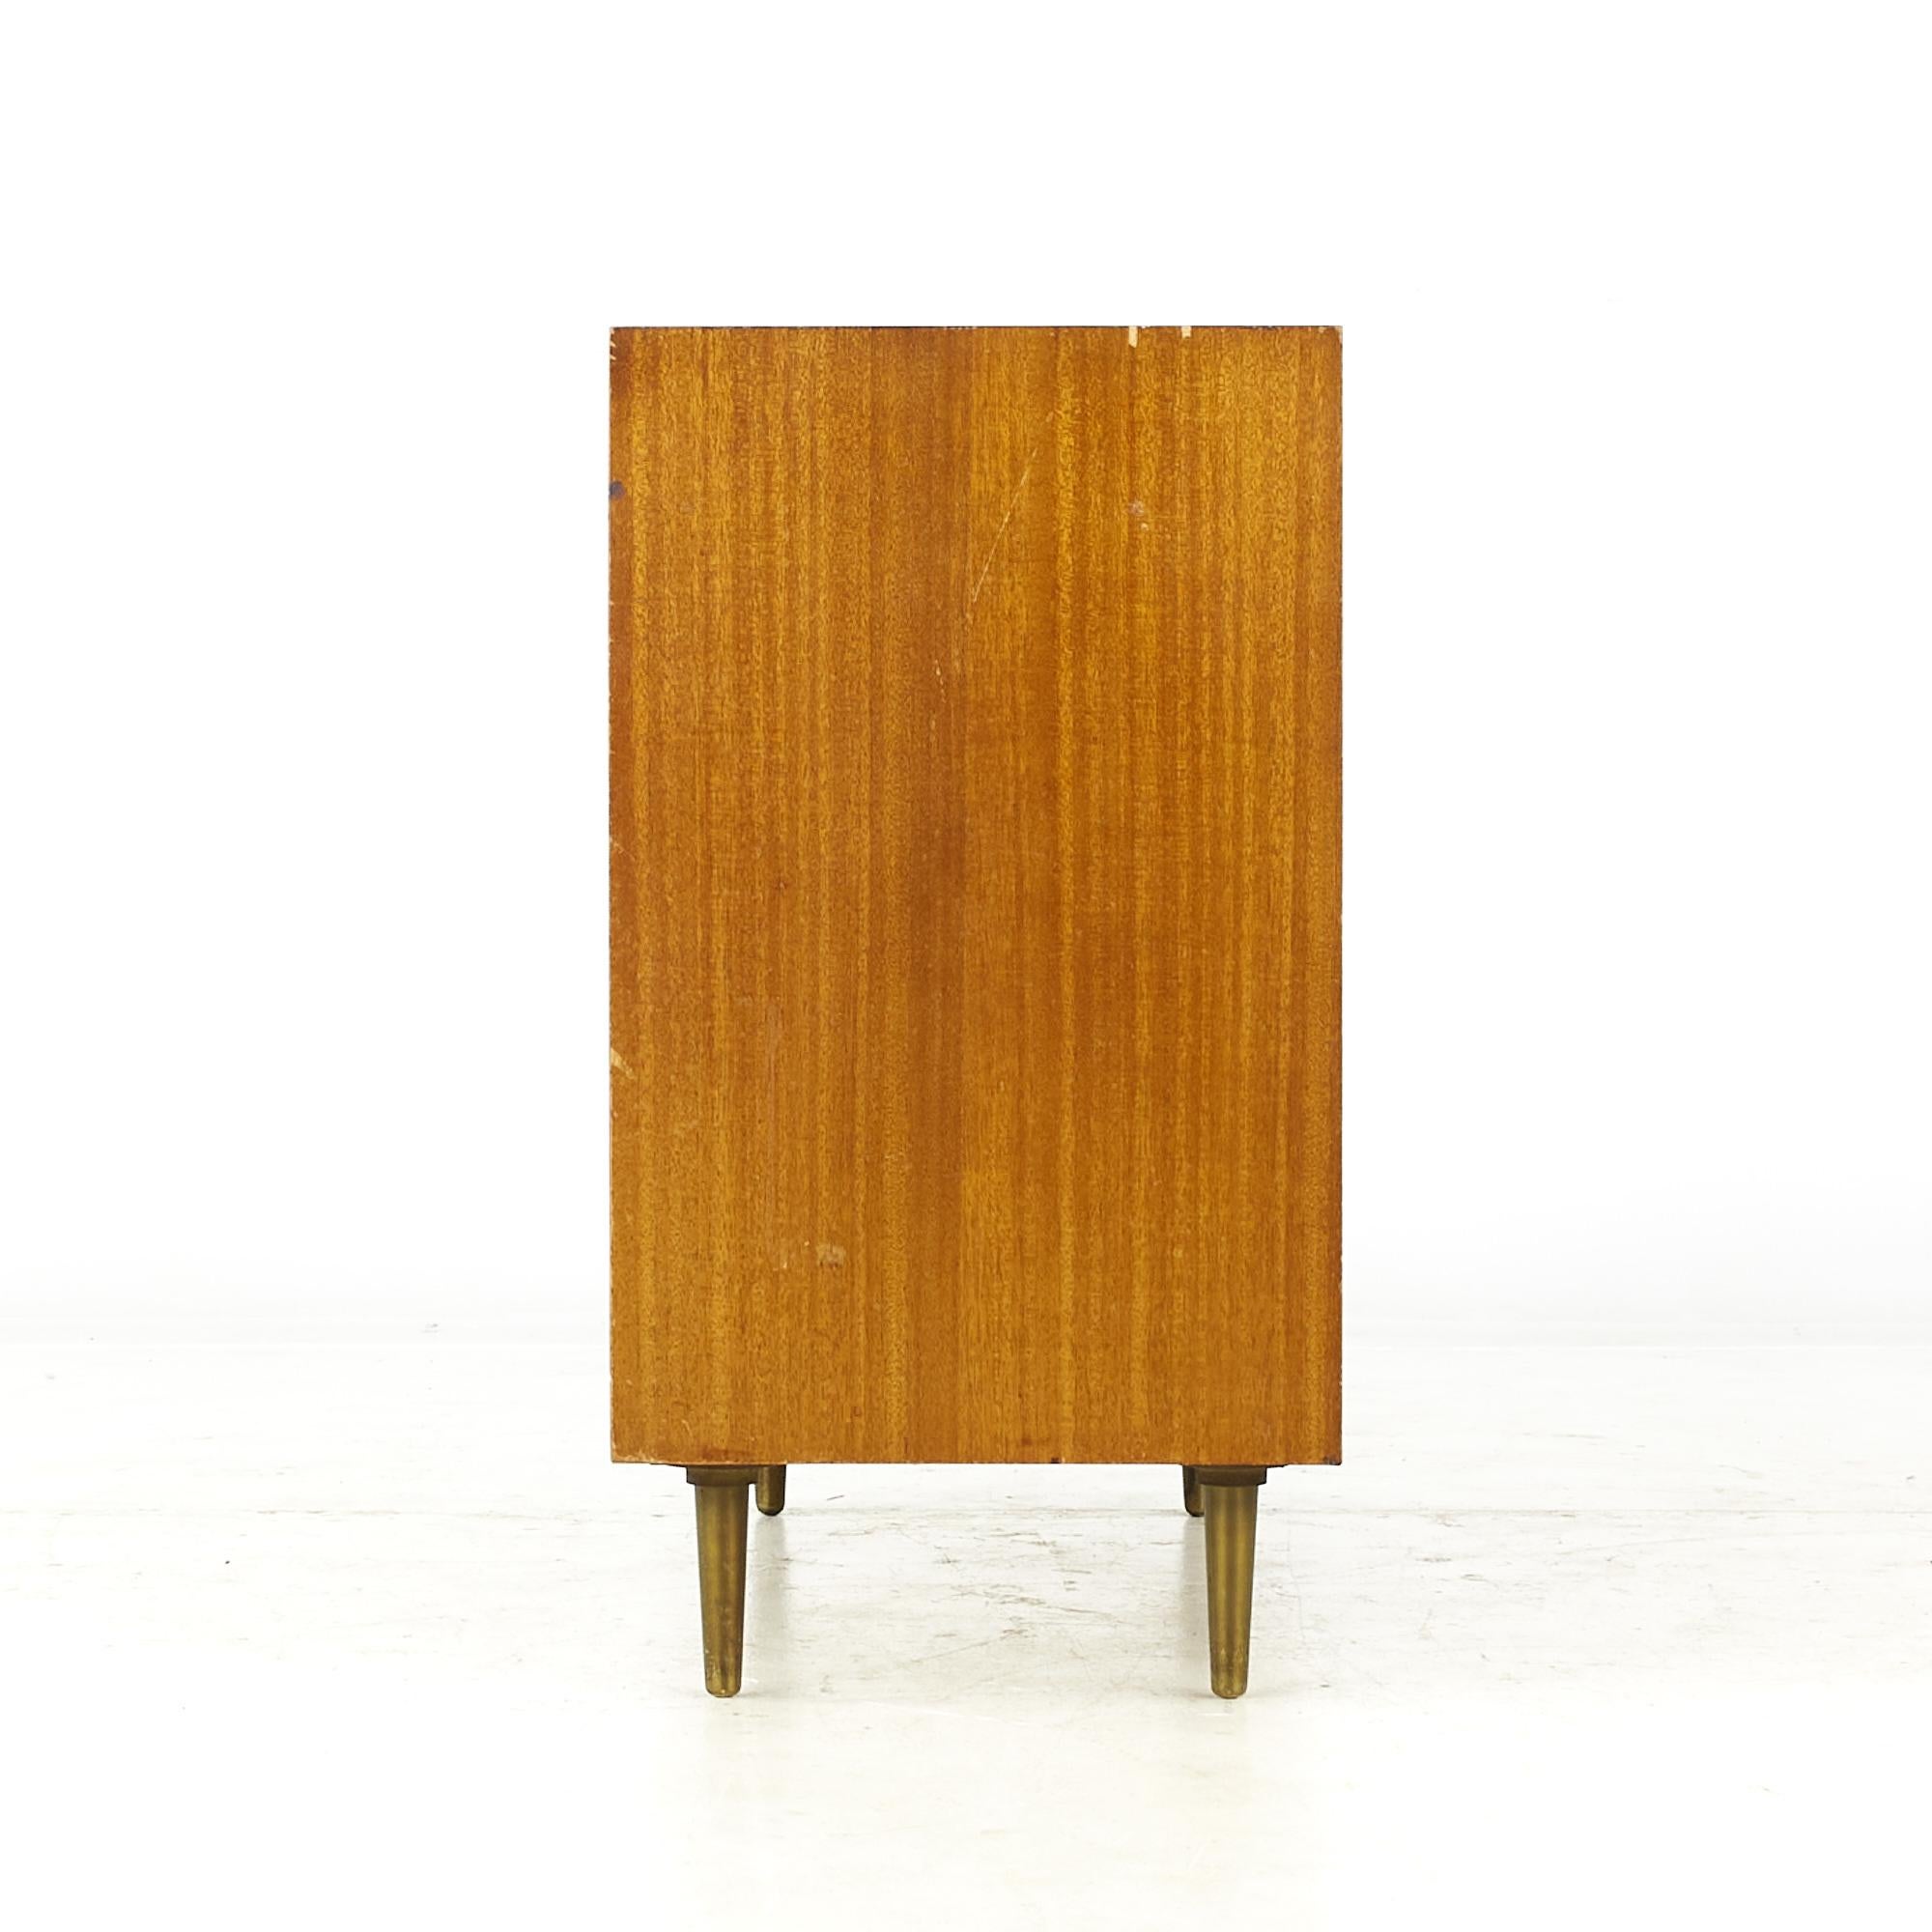 Late 20th Century Edward Wormley for Dunbar Mid Century Bleached Mahogany Sliding Door Credenza For Sale